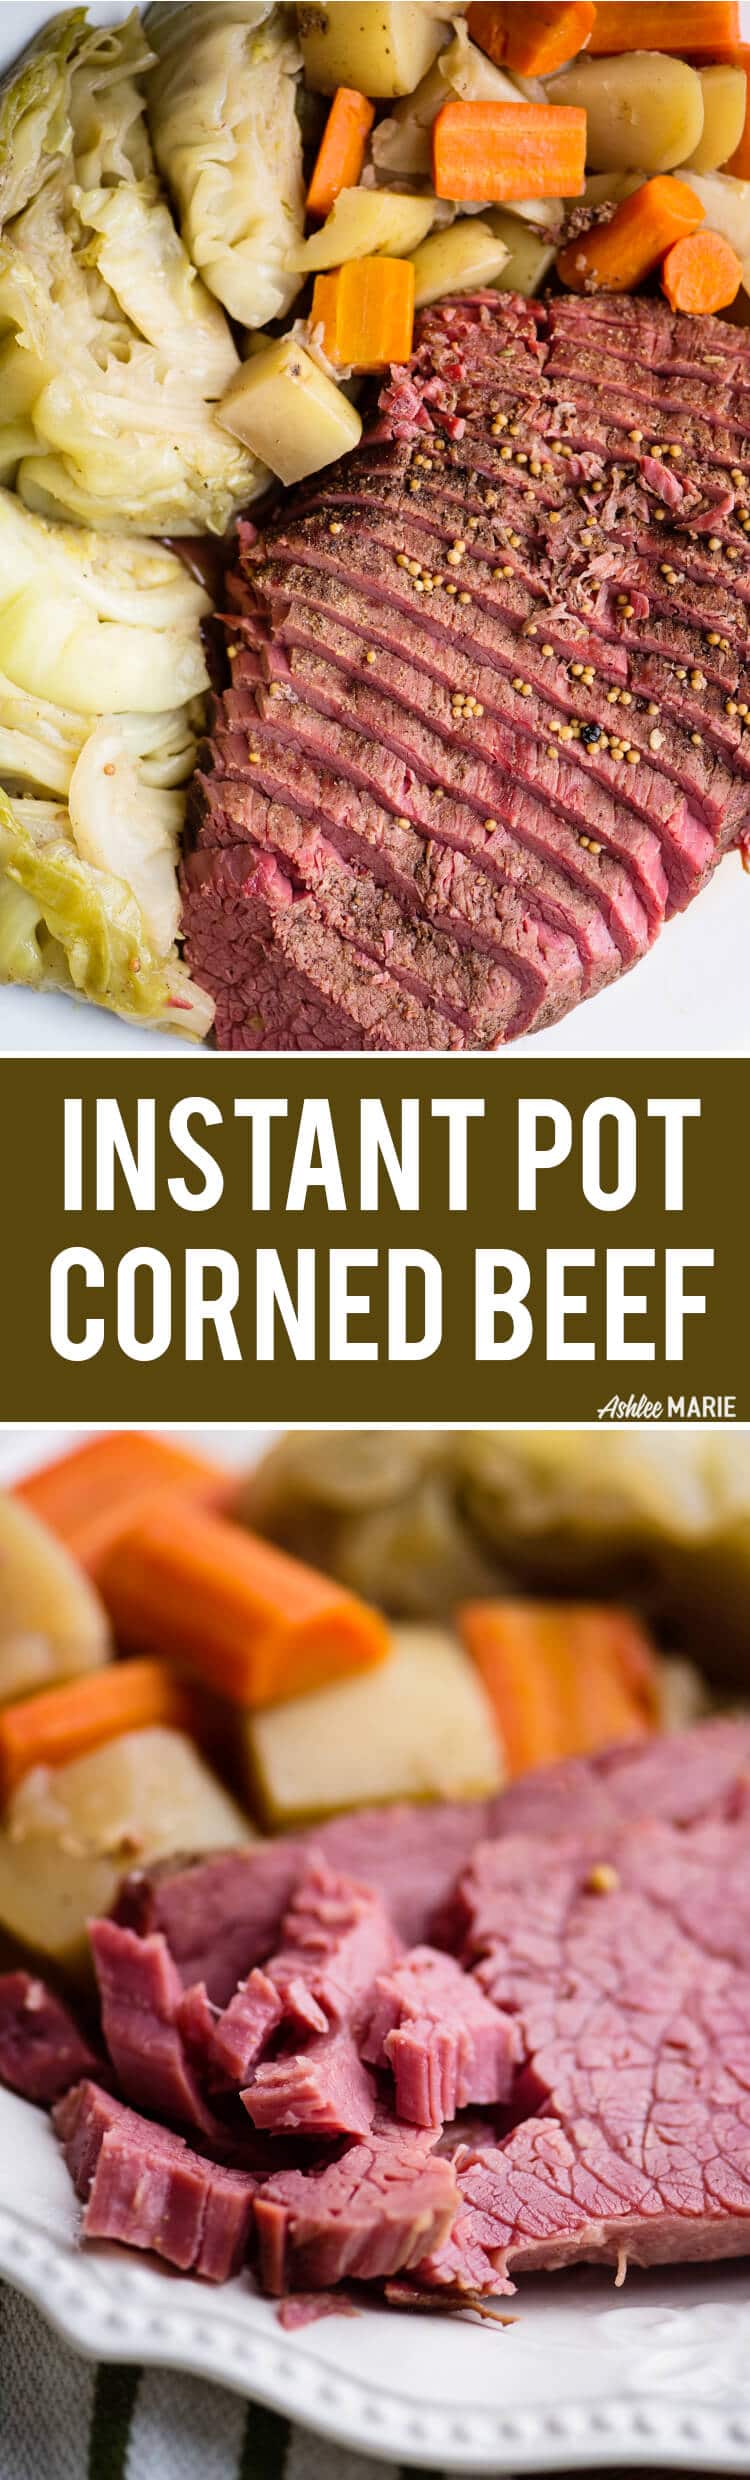 instant pot corned beef and cabbage recipe and video tutorial